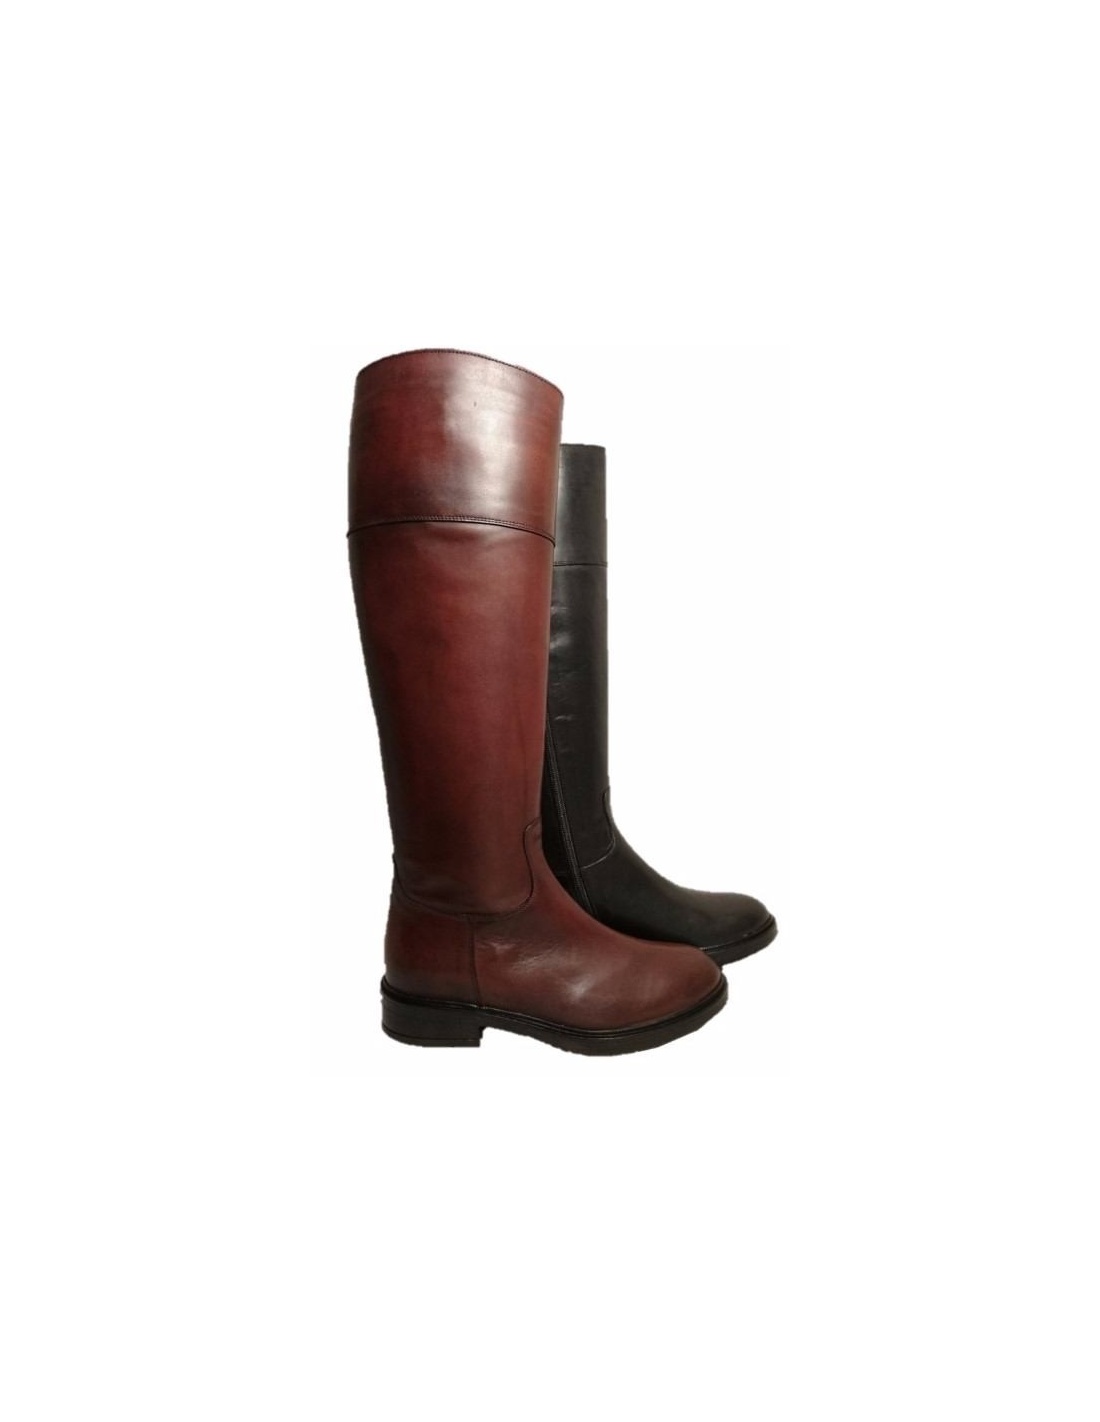 leather riding boots for women